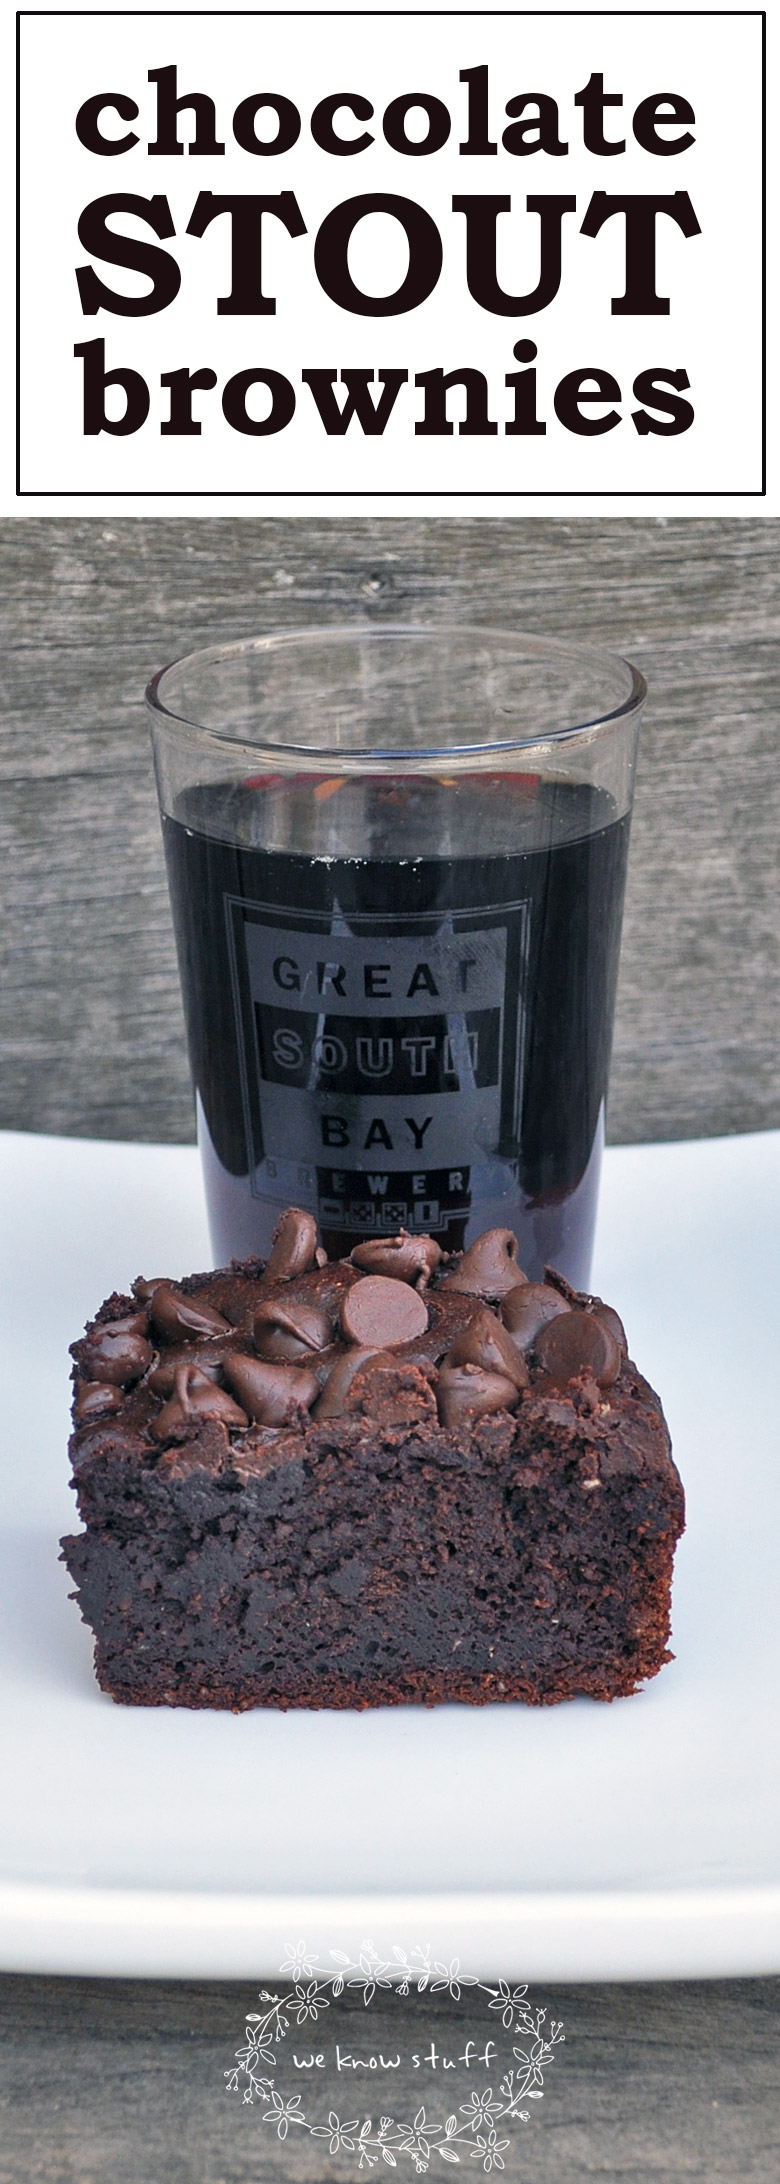 Did you know that you can bake with beer? Well, it's true – and the results are often delicious as seen with this chocolate stout brownies recipe. They're perfect for Saint Patrick's Day!